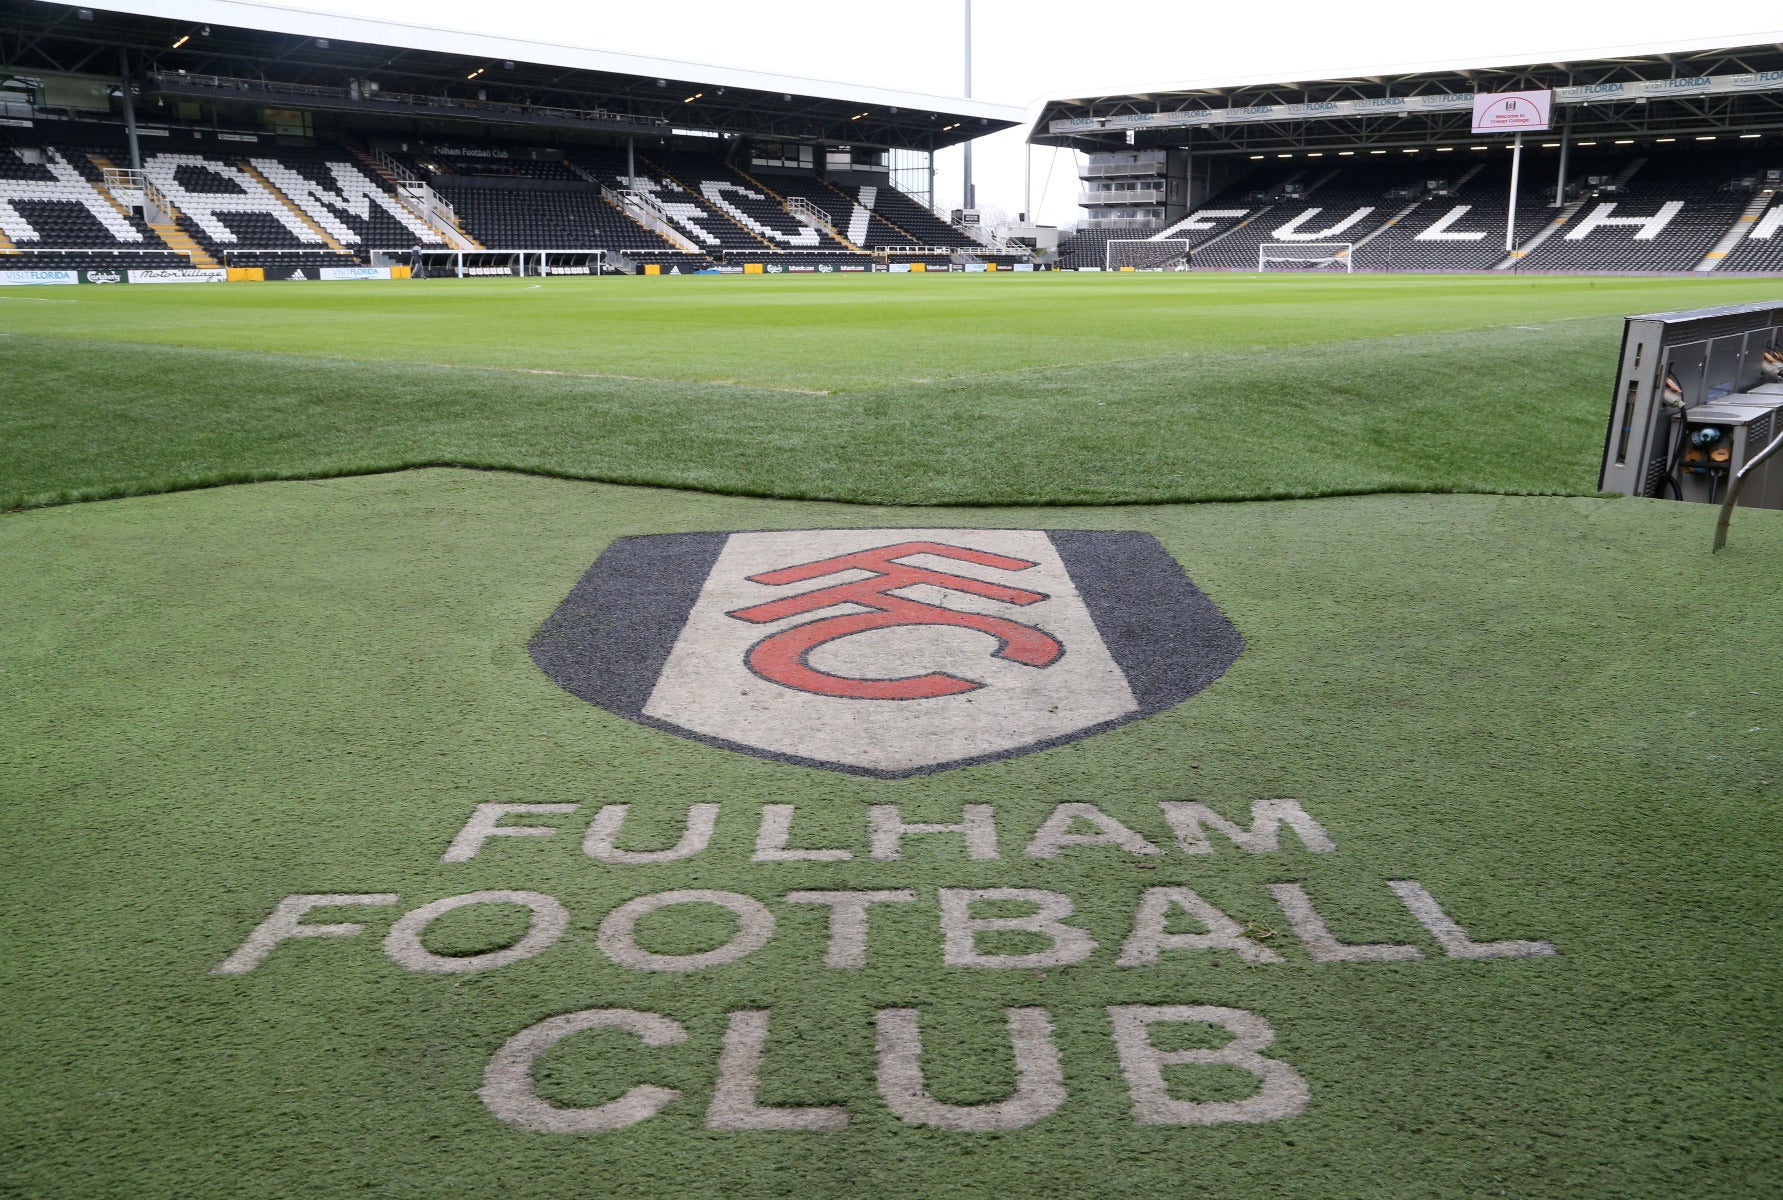 Fulham Craven Cottage Stadium Full Wall Mural Pitch Club Crest